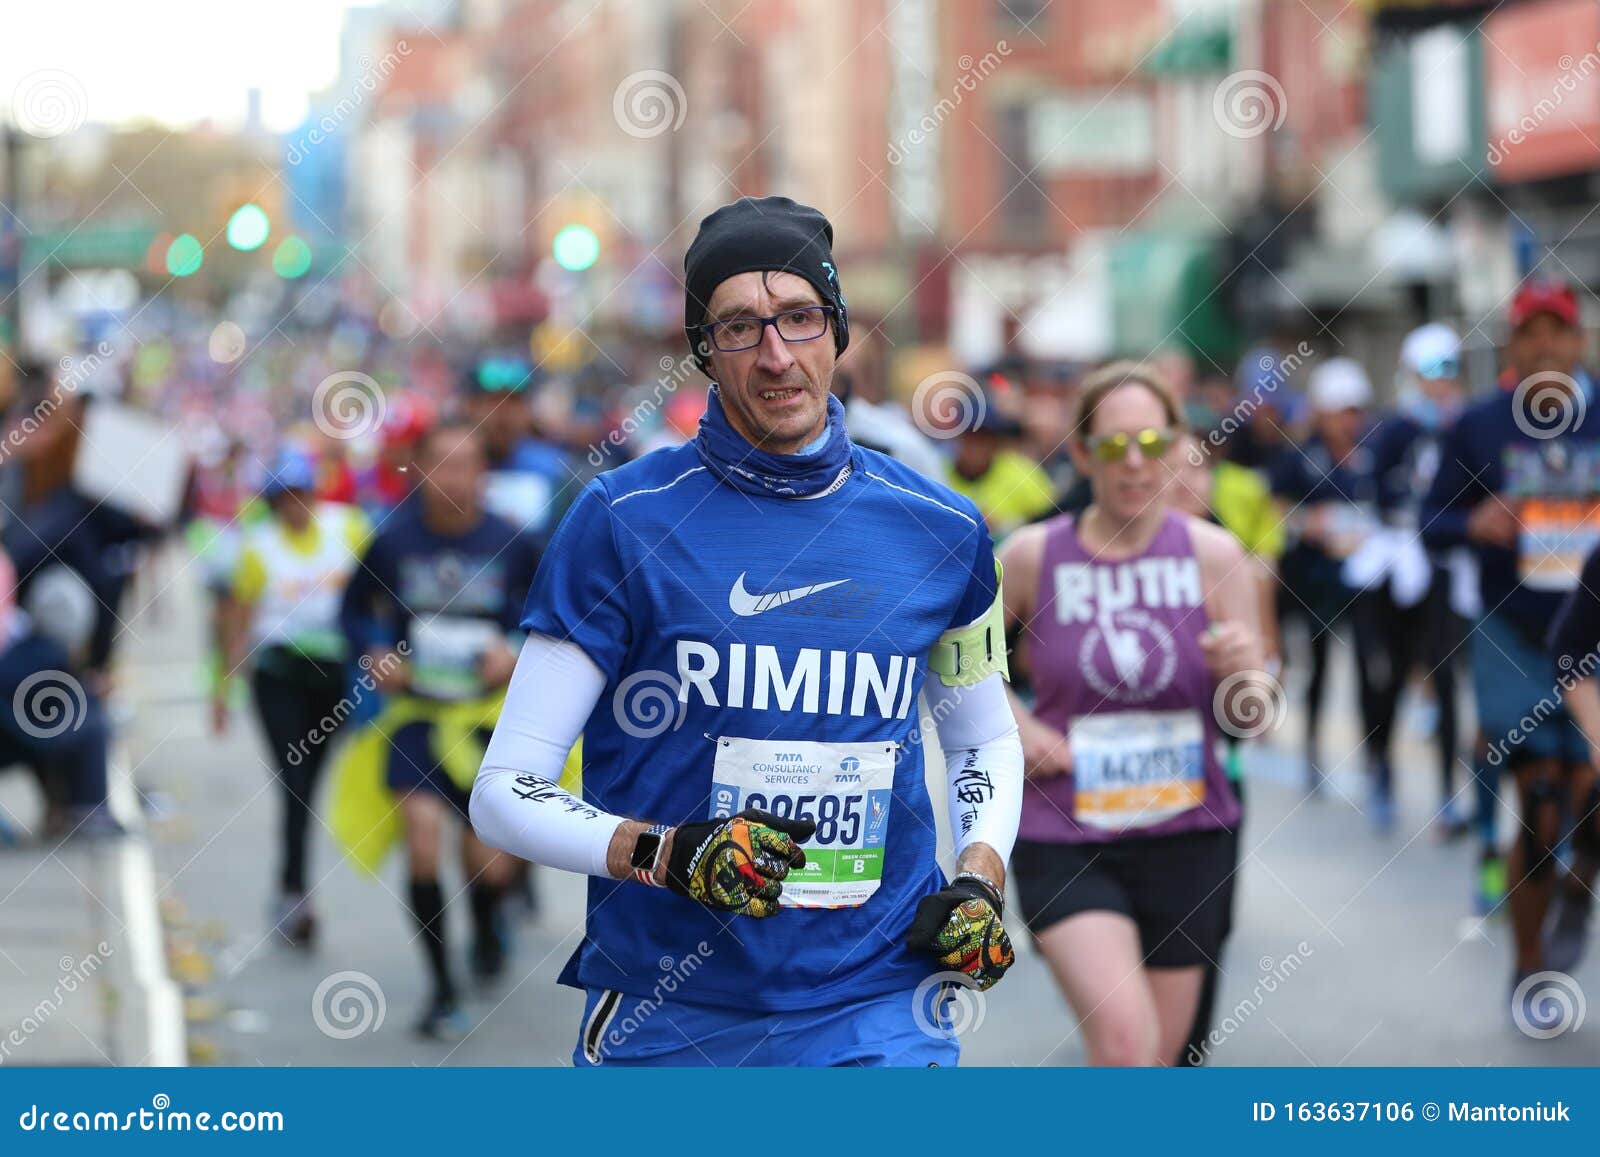 Marathon NYC 2019 Sport Event in Central Park Editorial Photo Image